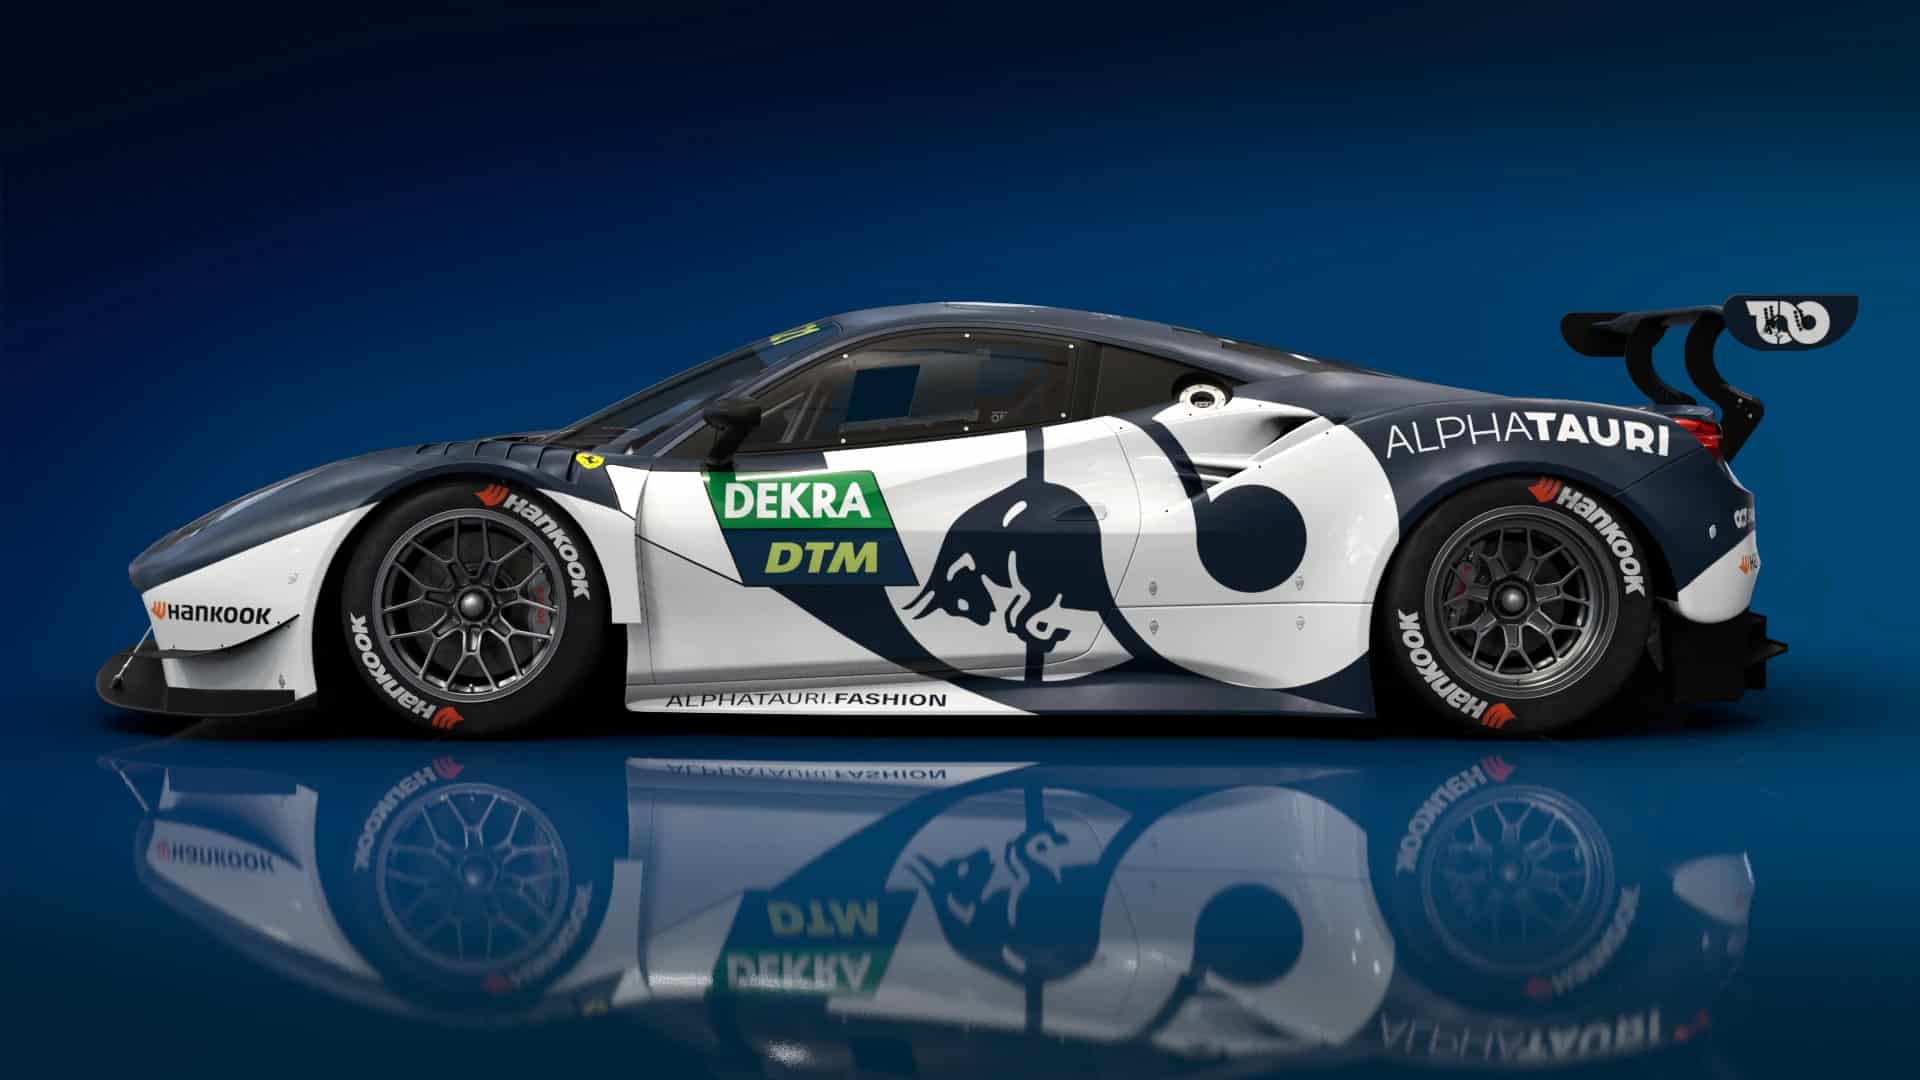 Red Bull Returns To DTM With Two Ferrari 488 GT3s!